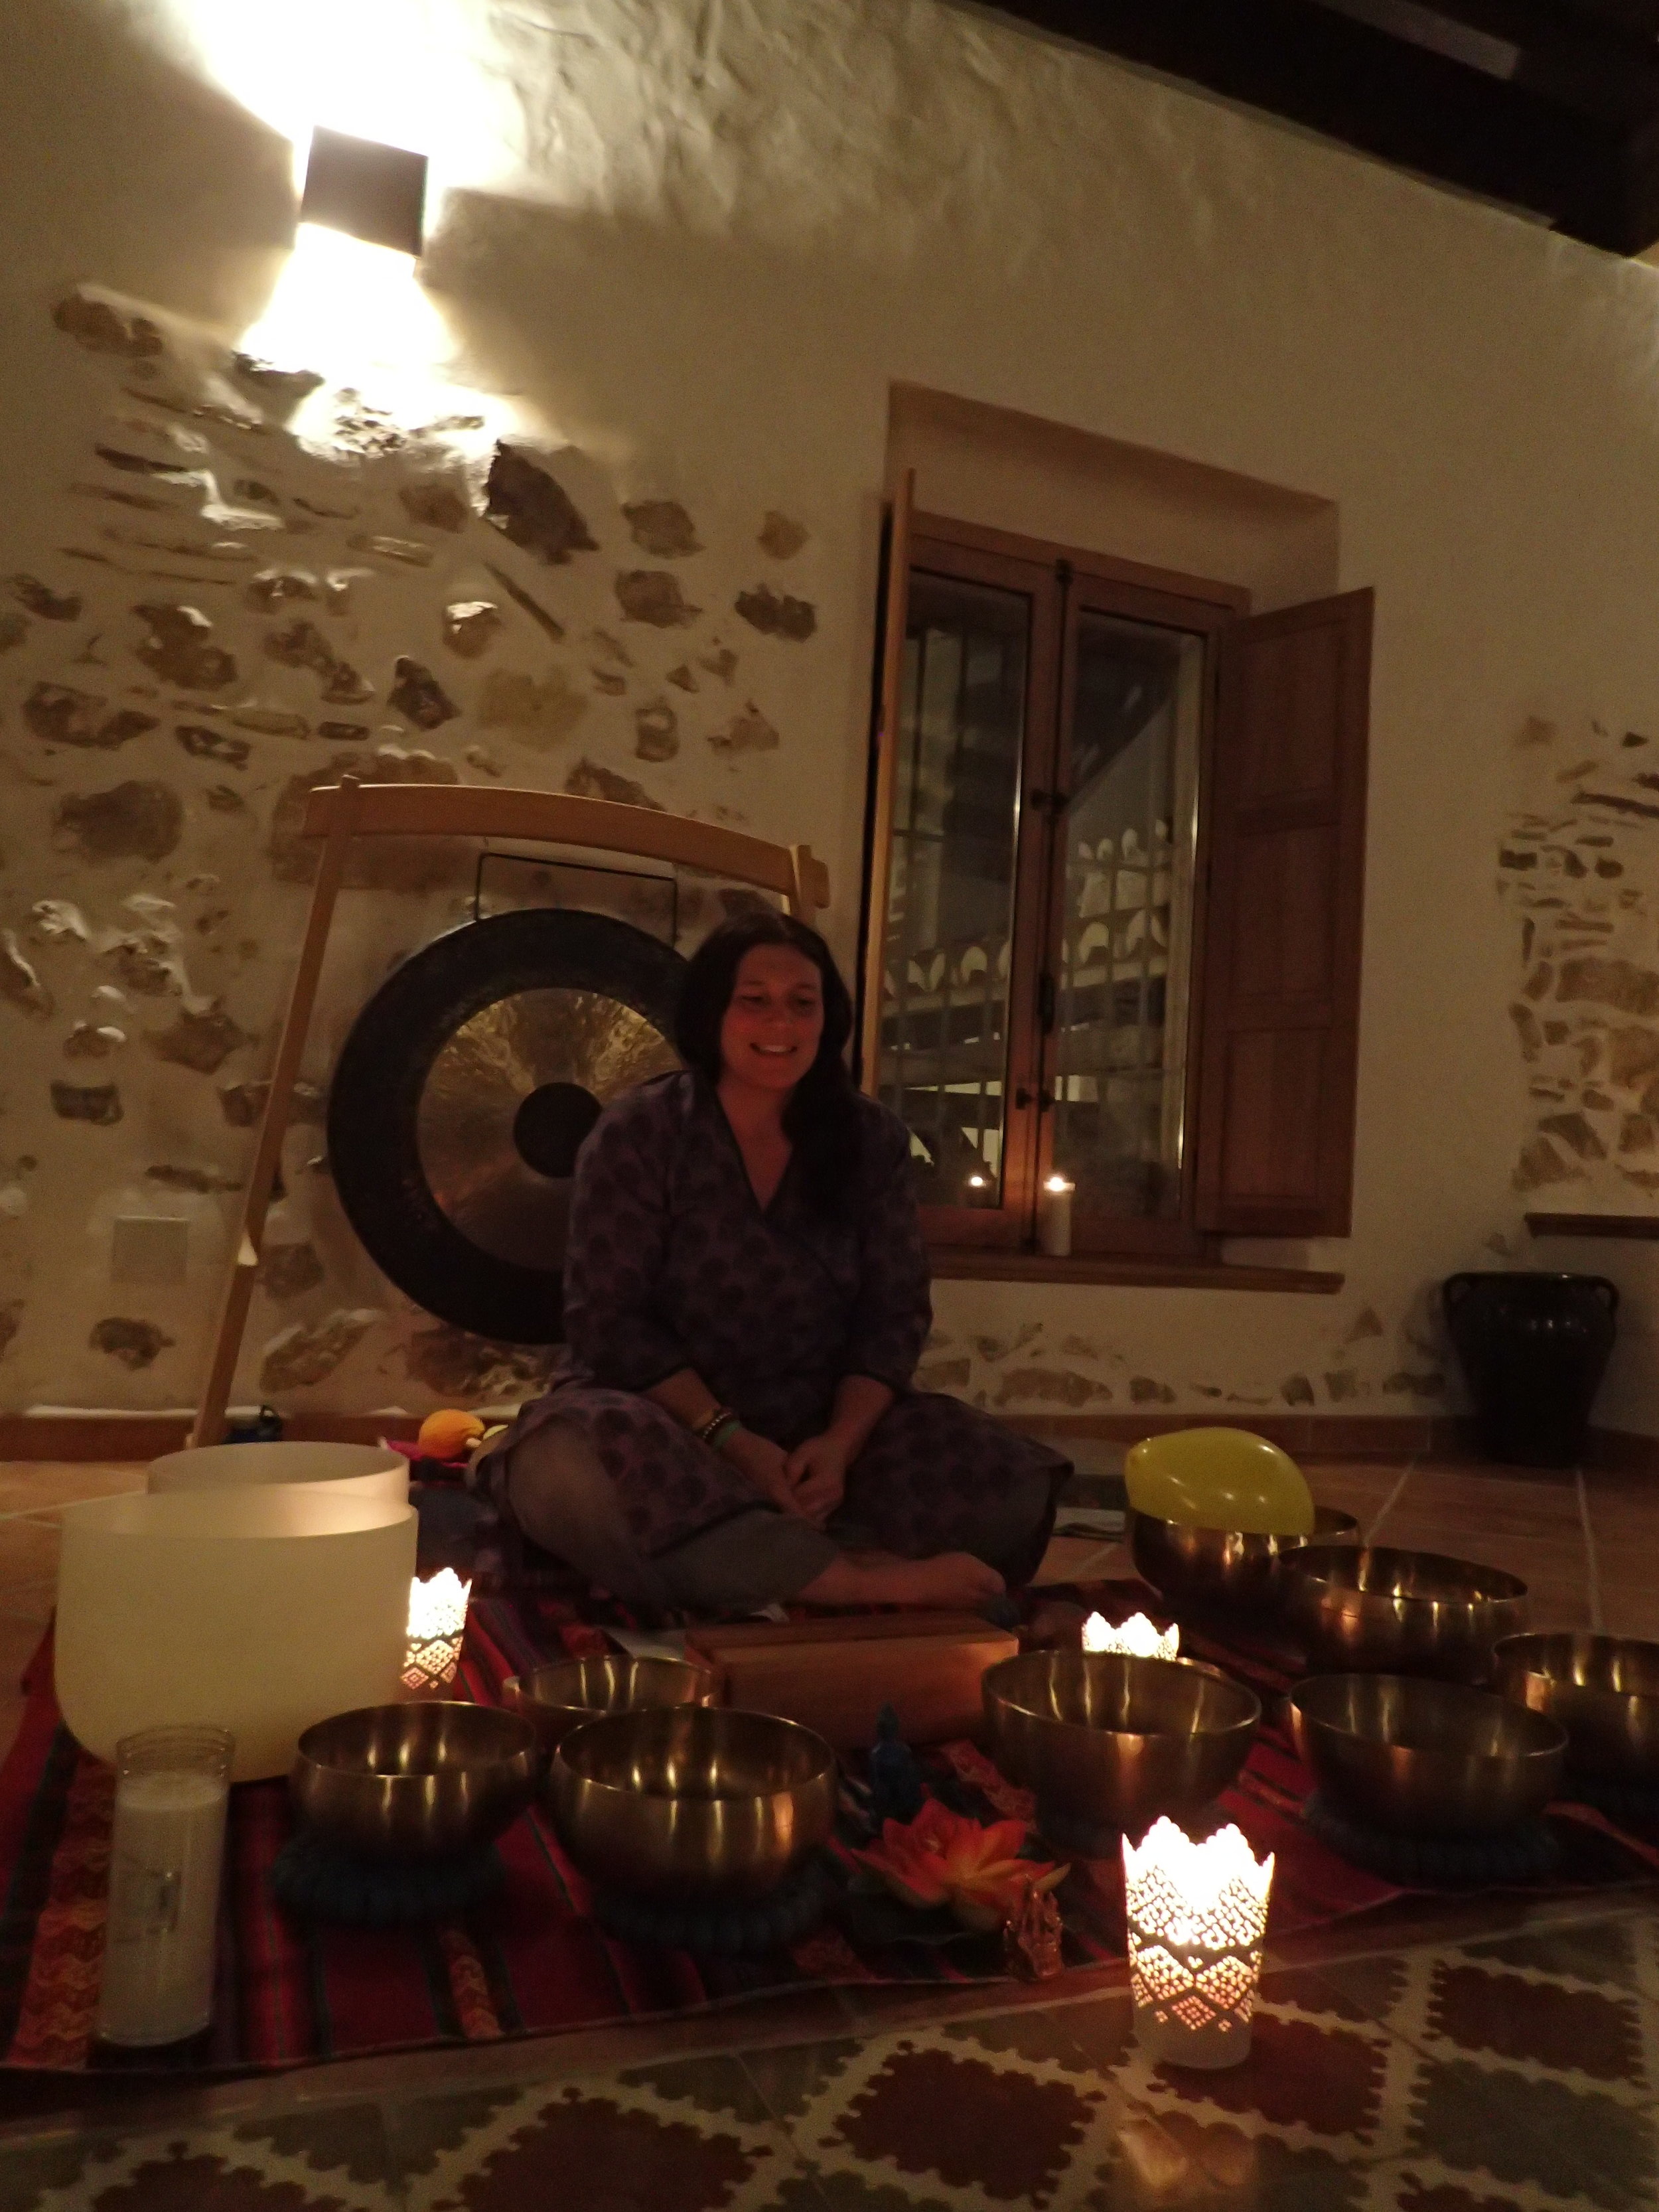 Sound journey with Tiziana at Yin Yang Yoga retreat in the Malaga mountains in Spain with Jane Bakx Yoga